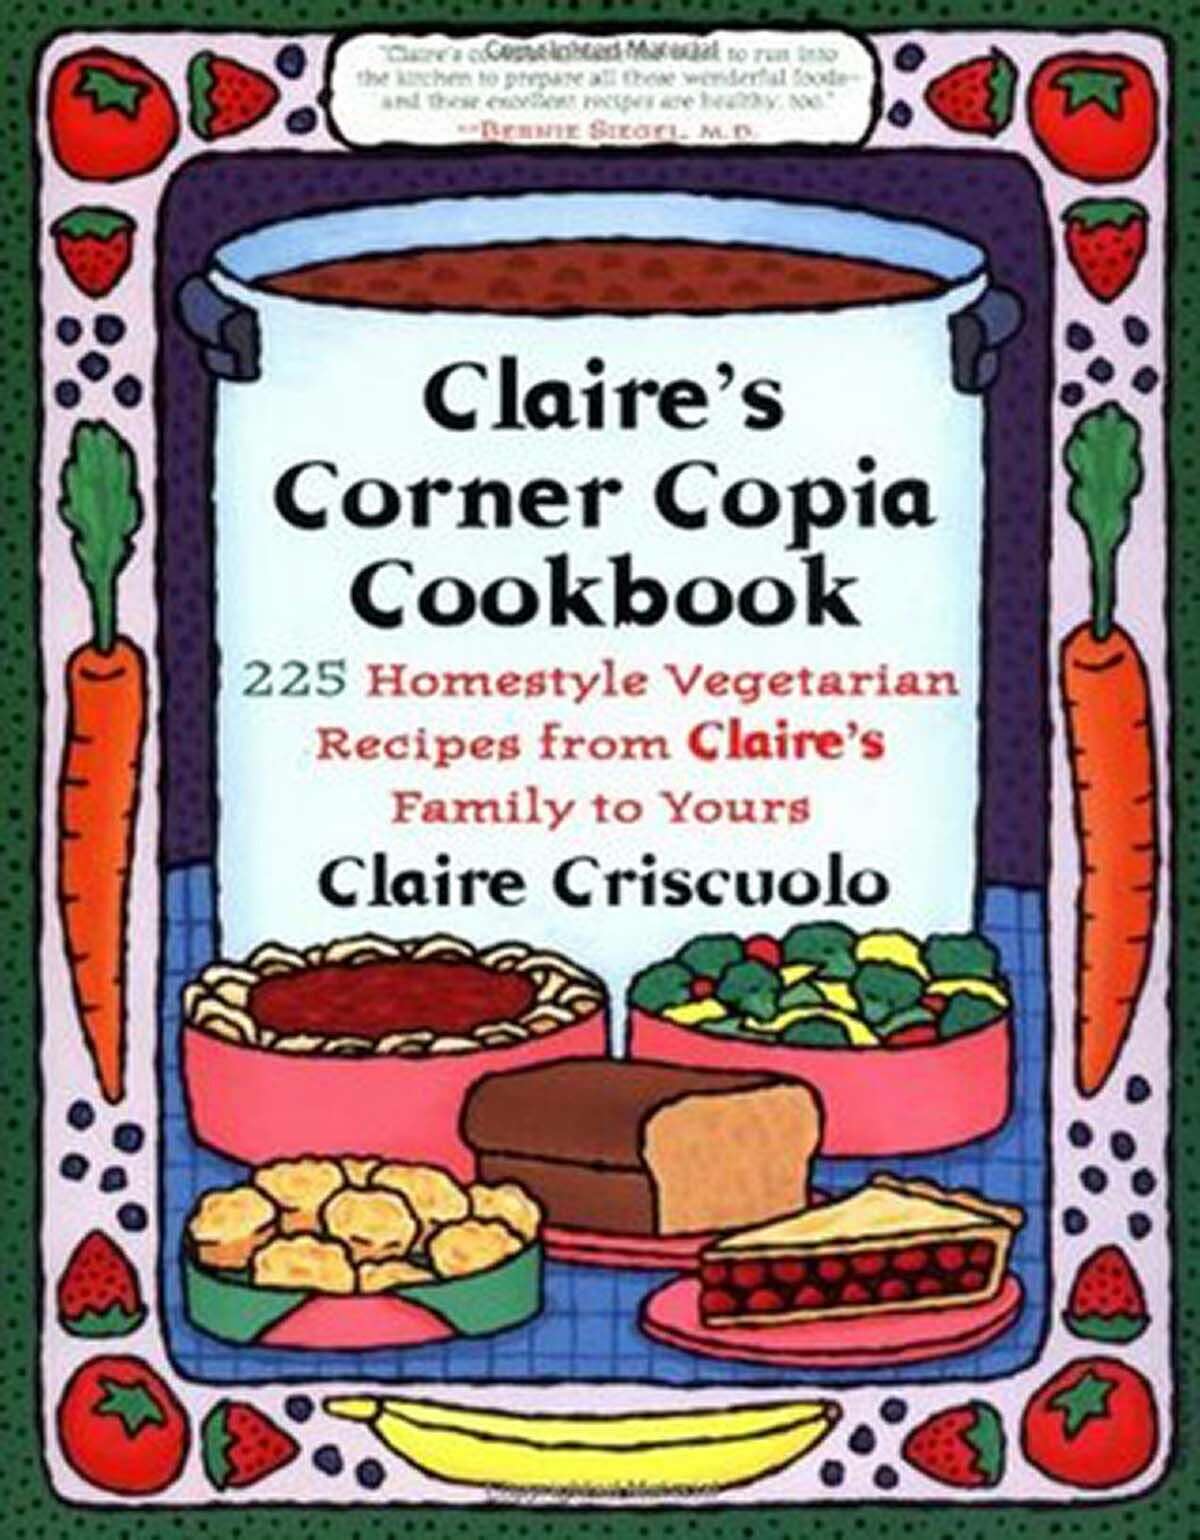 This French peasant soup has been a staple at Claire’s Corner Copia for years and has been featured in Claire’s Corner Copia Cookbook since 1994.